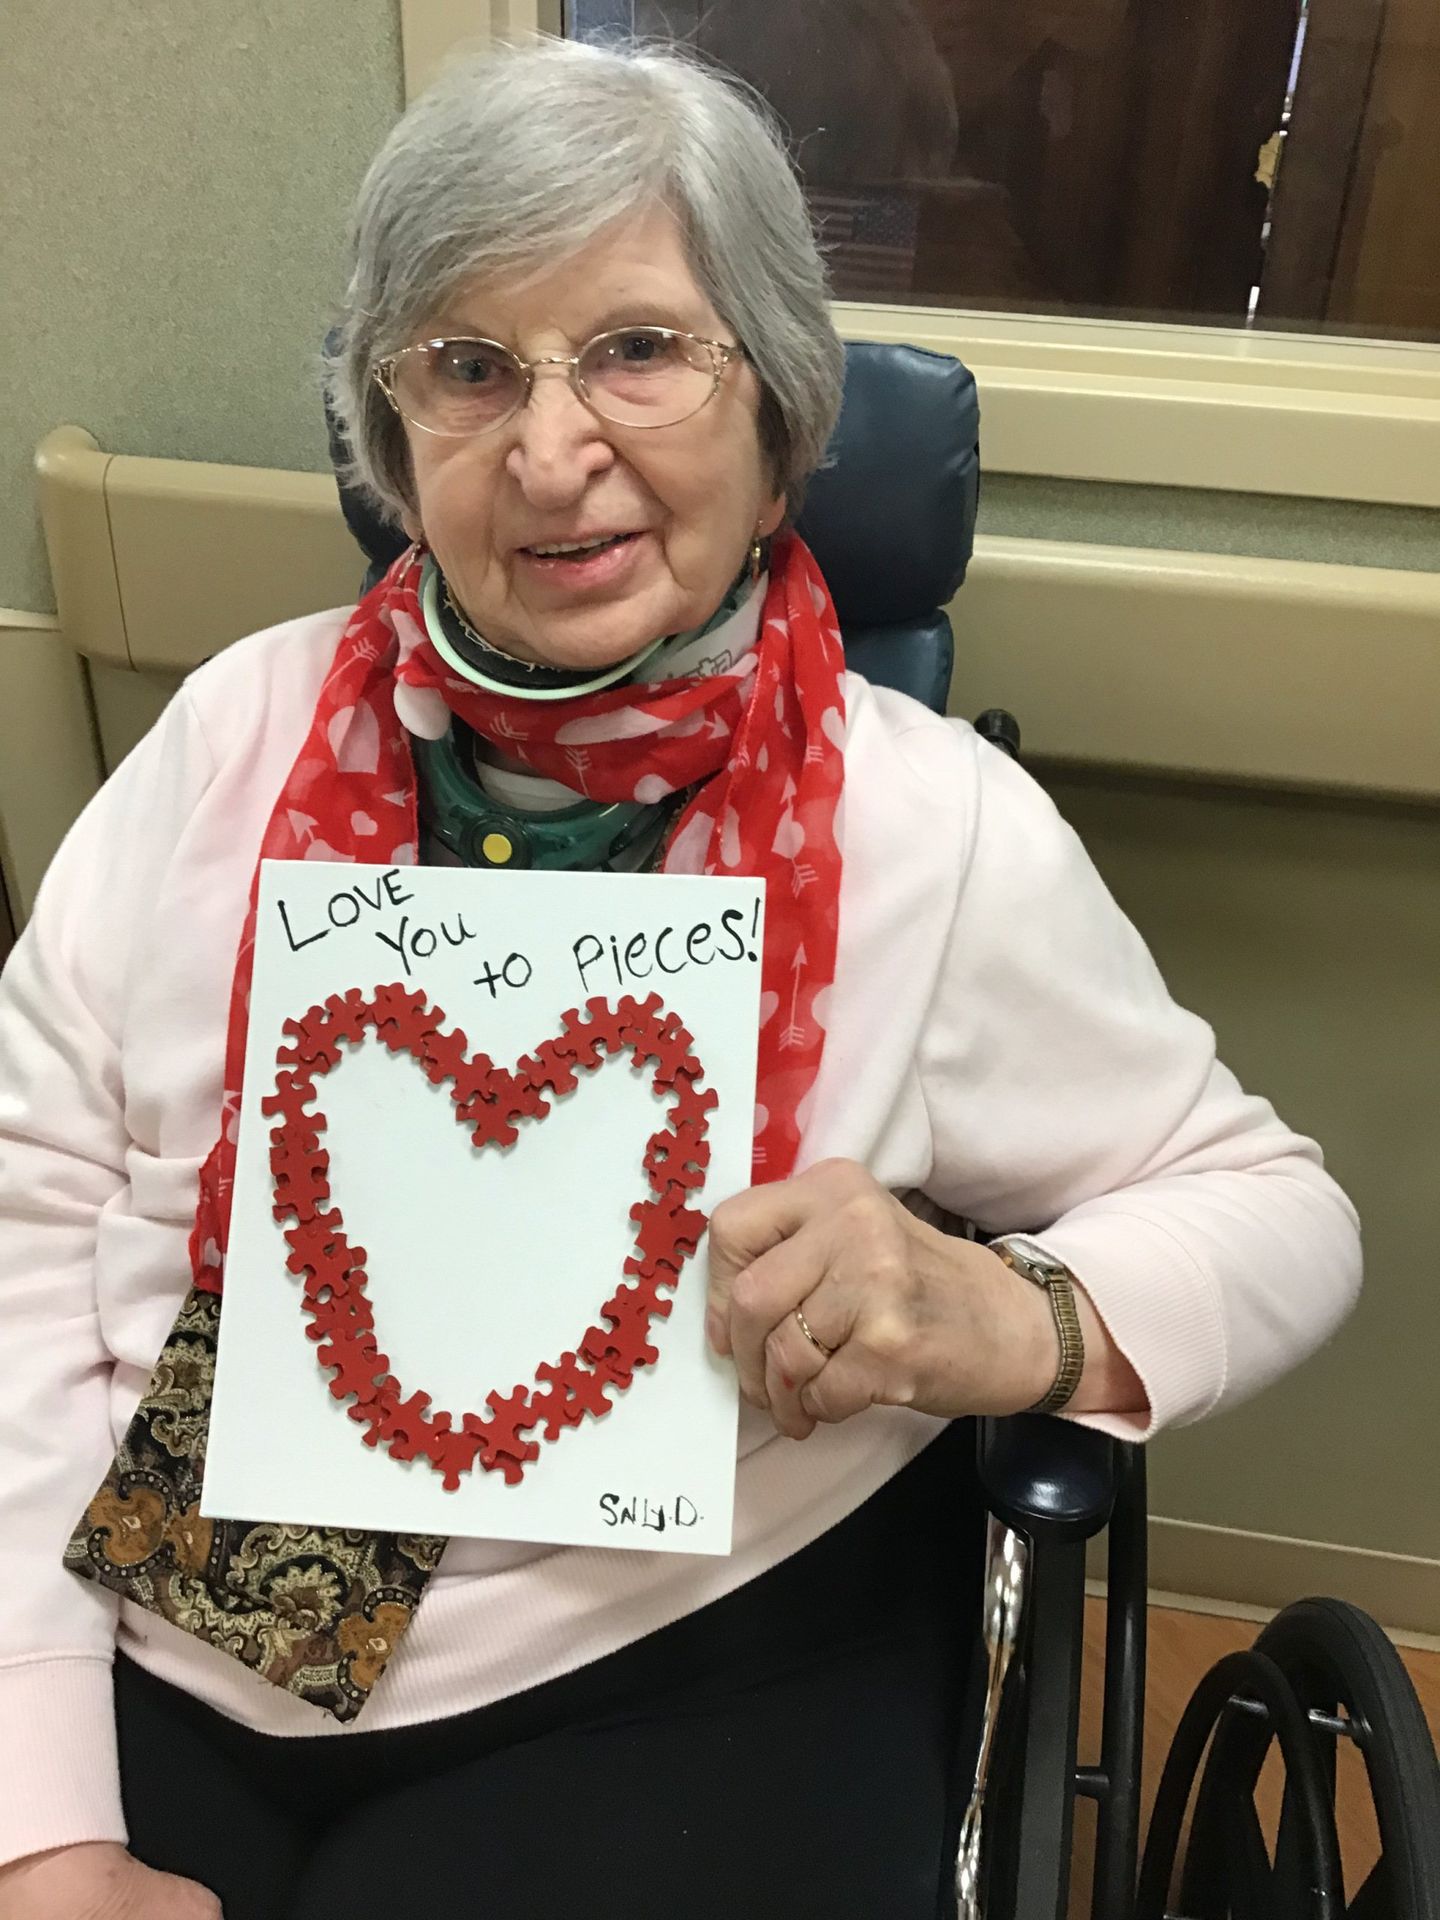 Elder showing off her Valentine's Day craft at Lenawee Medical Care Facility in Adrian, MI